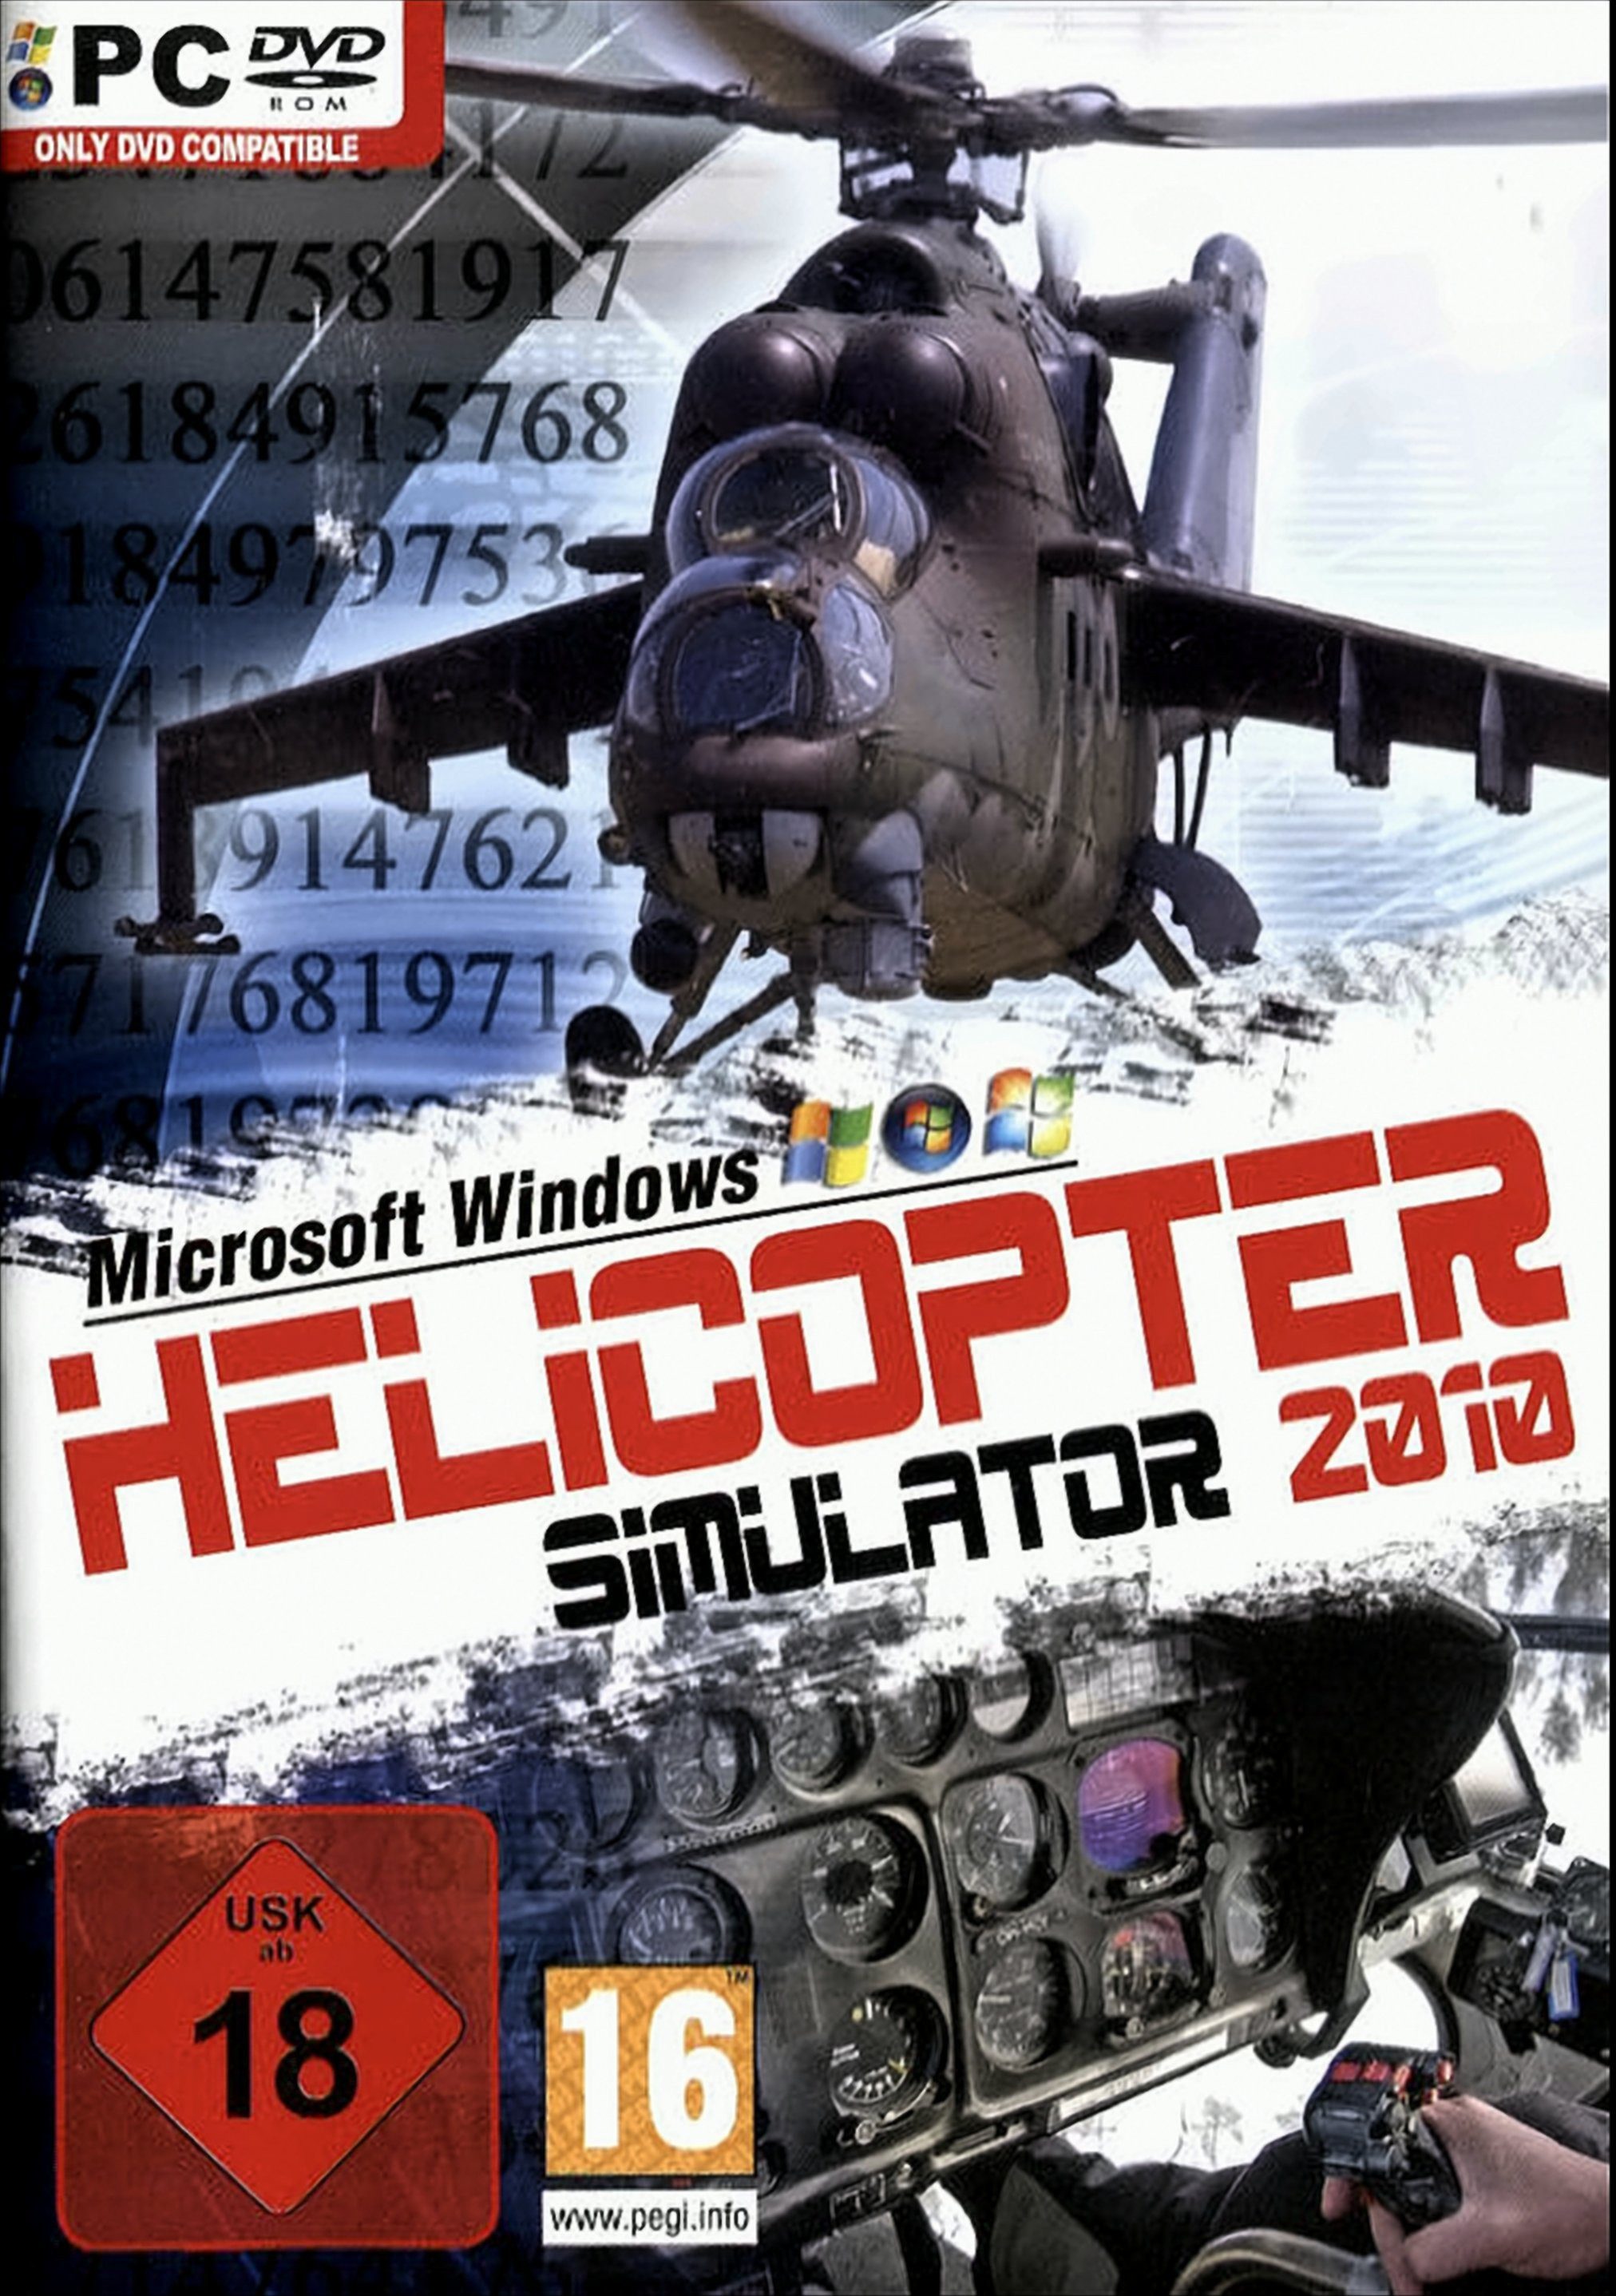 Helicopter Simulator 2010 PC